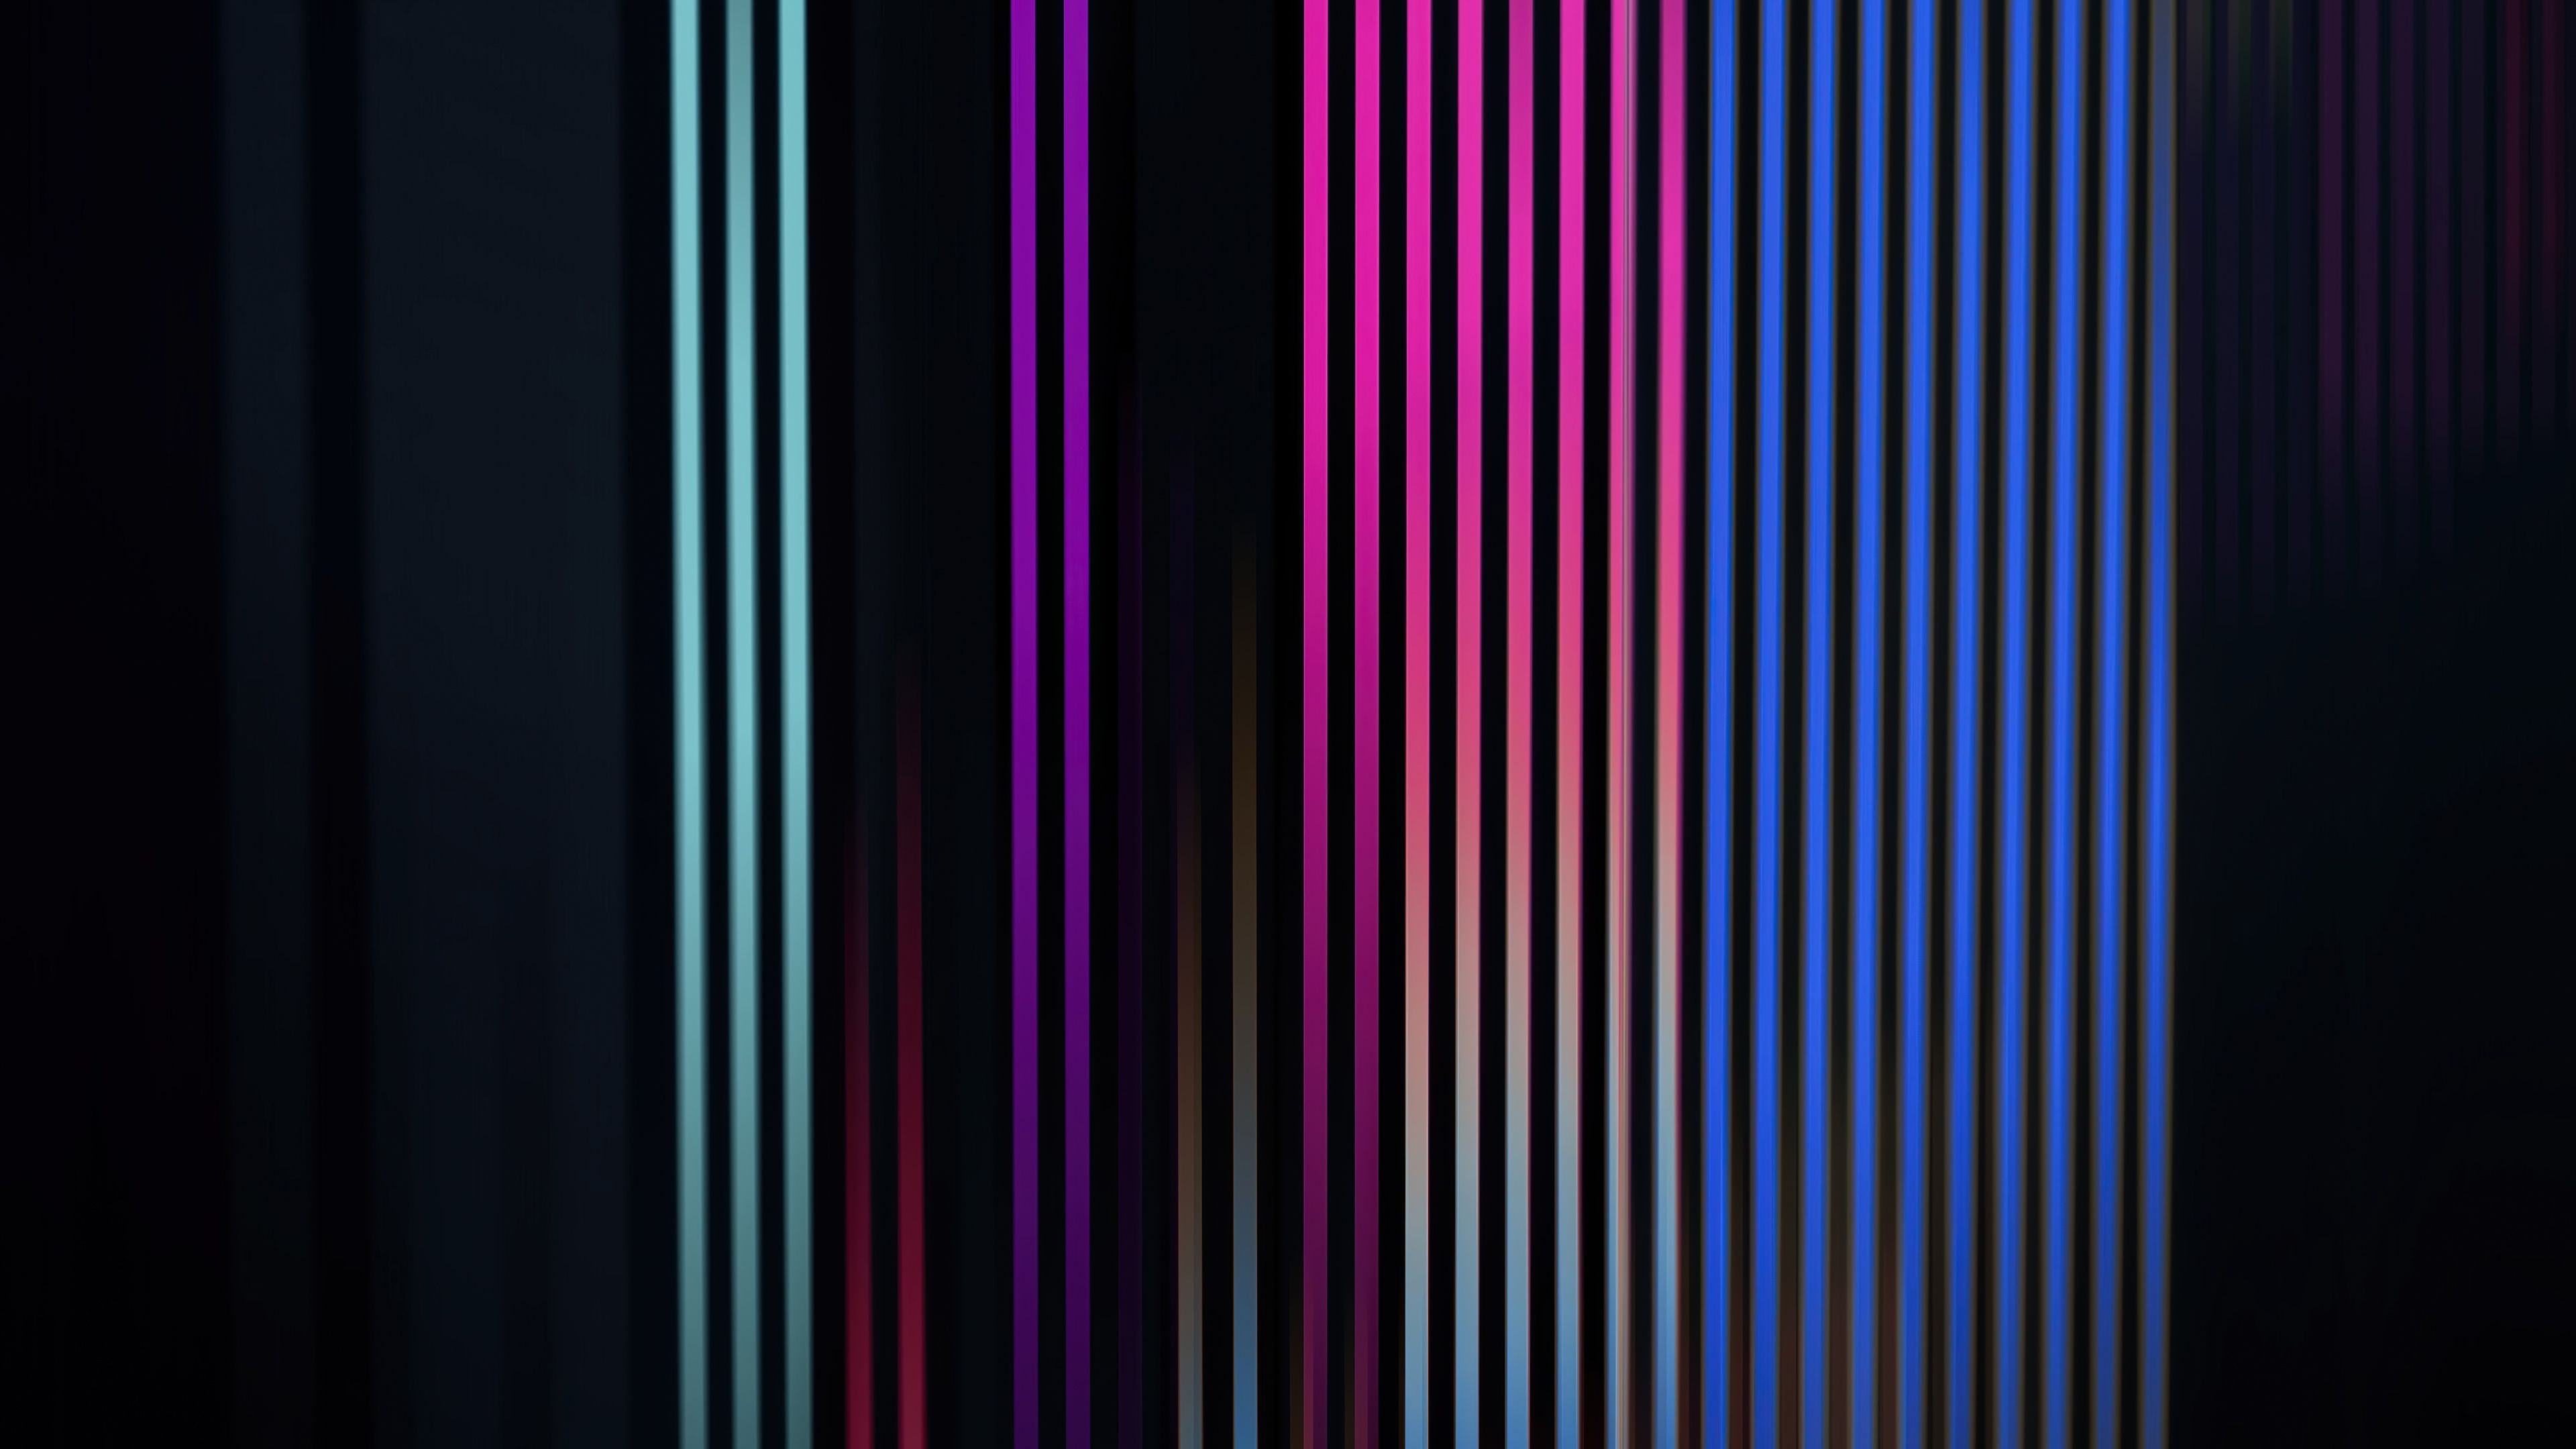 Down lines abstract, Abstract 4K wallpapers, Artistic expressions, Visual impact, 3840x2160 4K Desktop